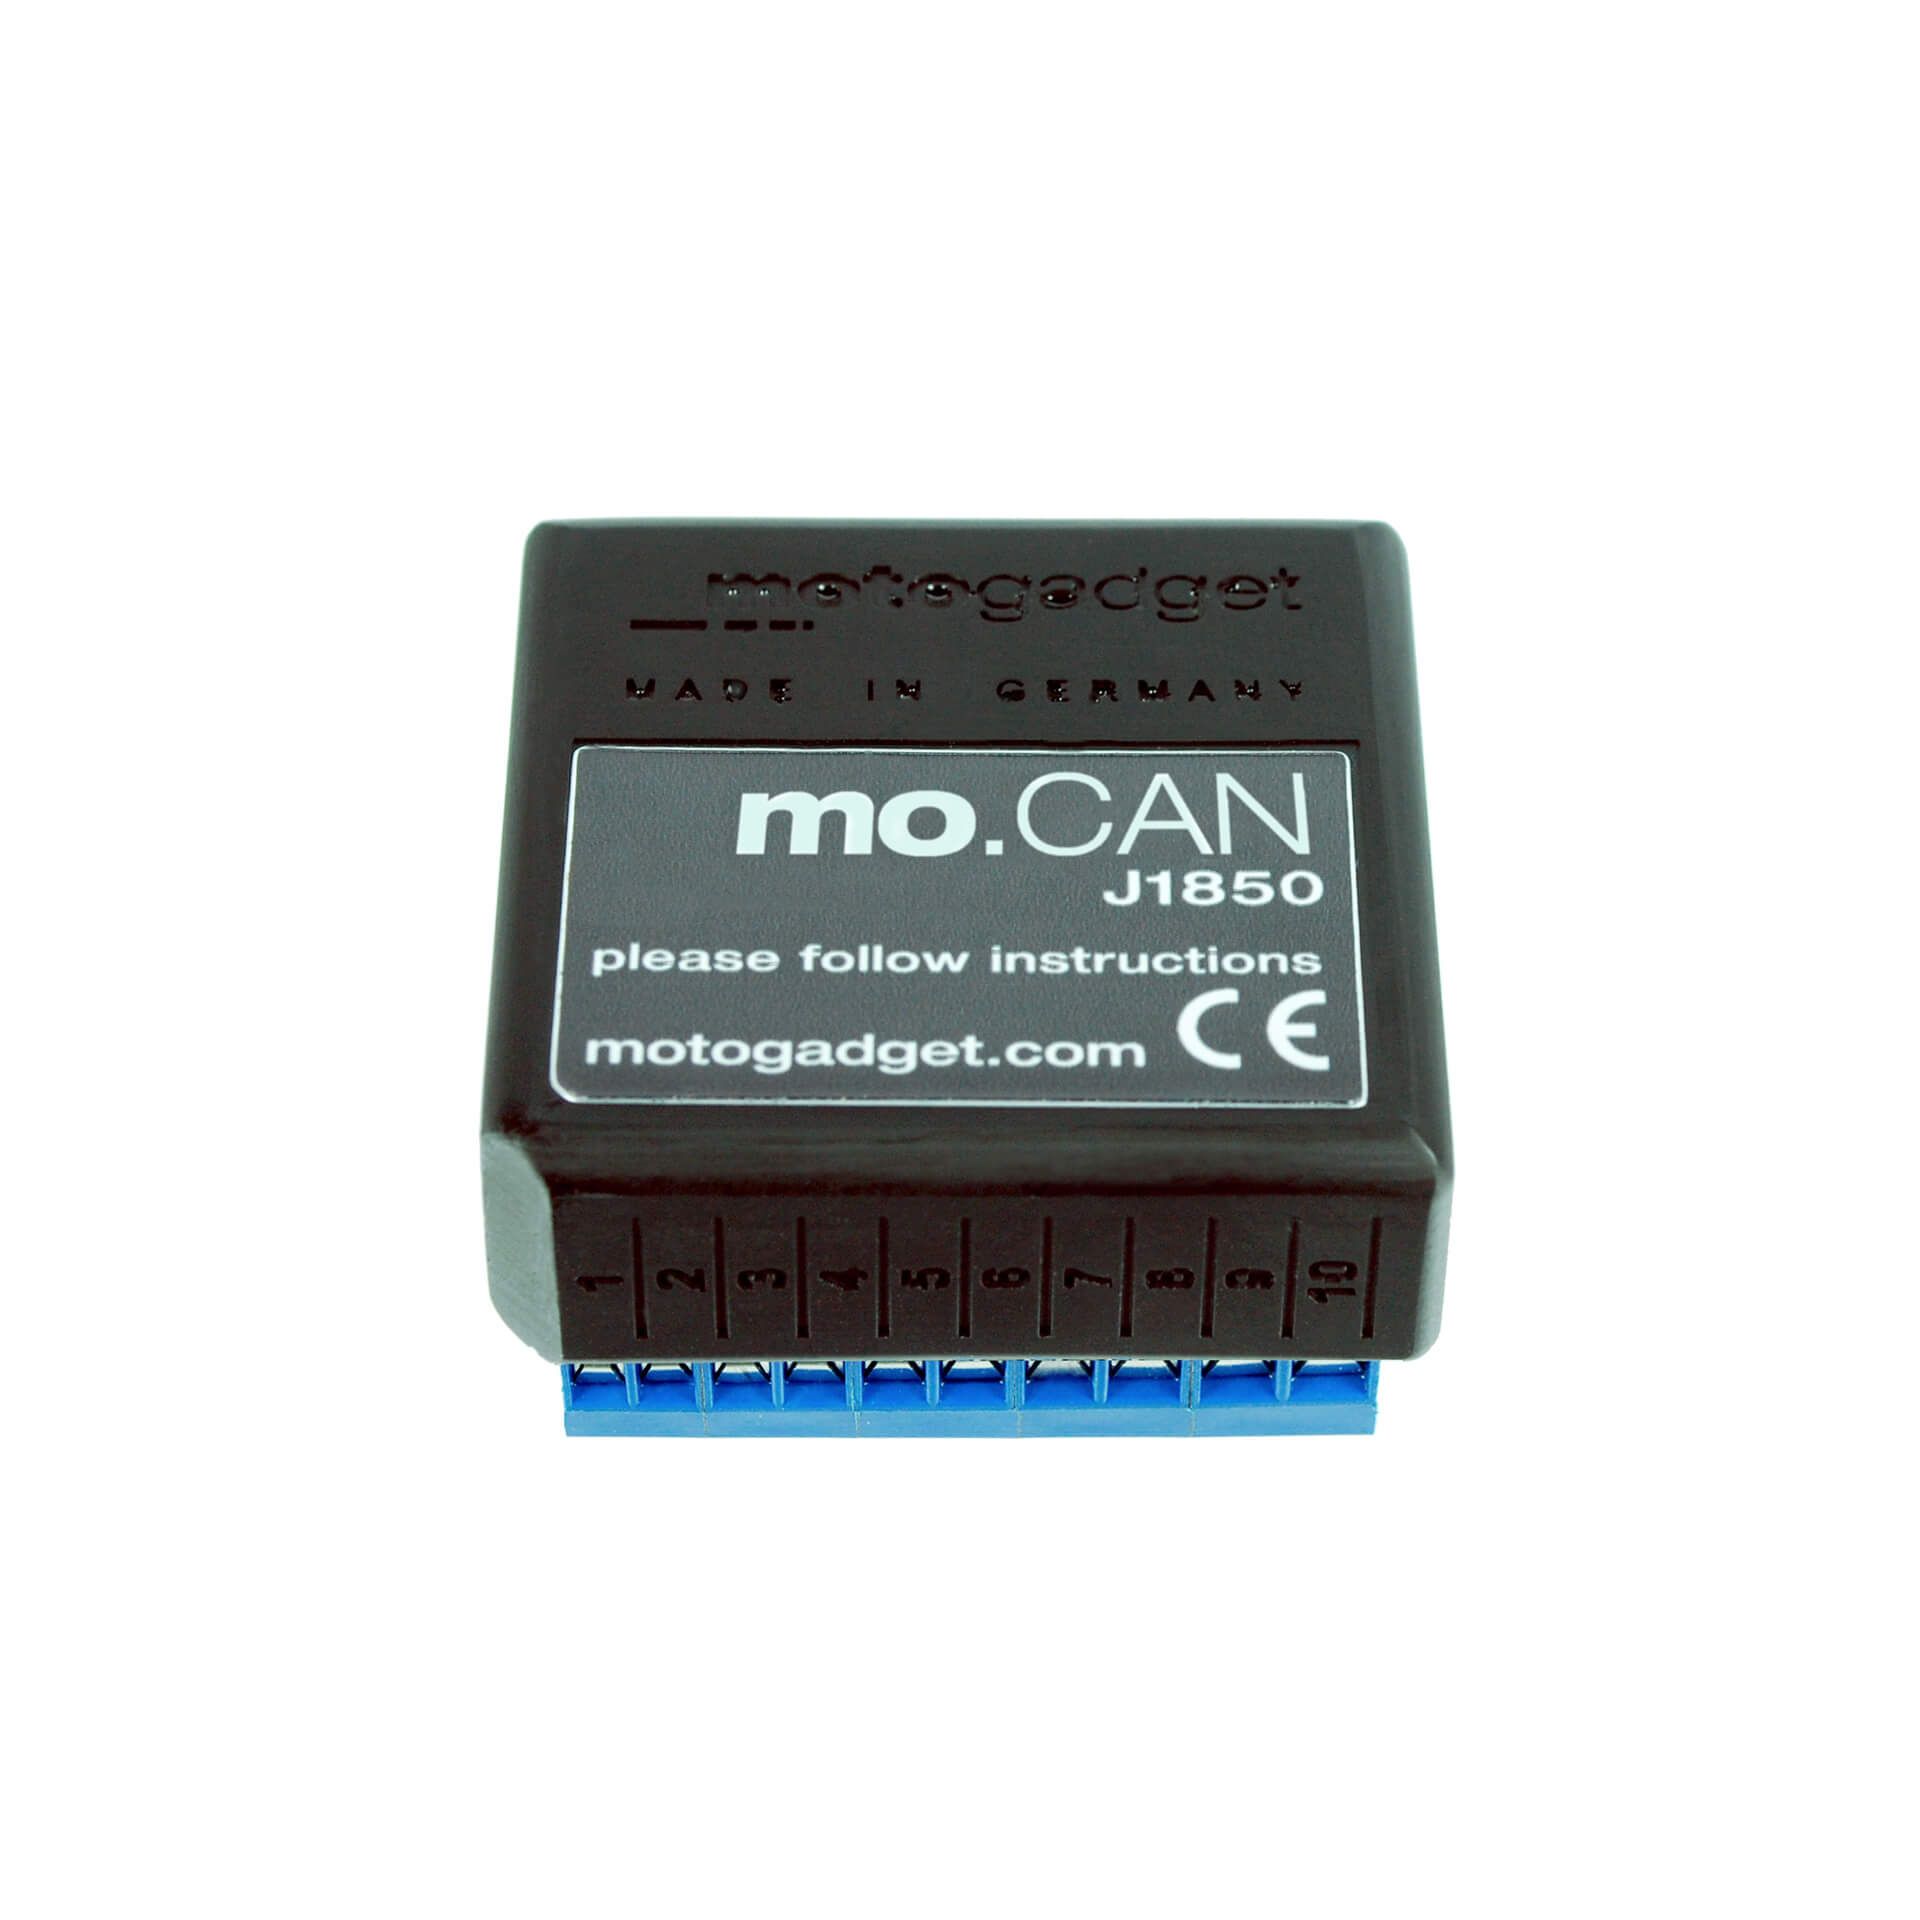 motogadget mo.CAN J1850 XL for H-D